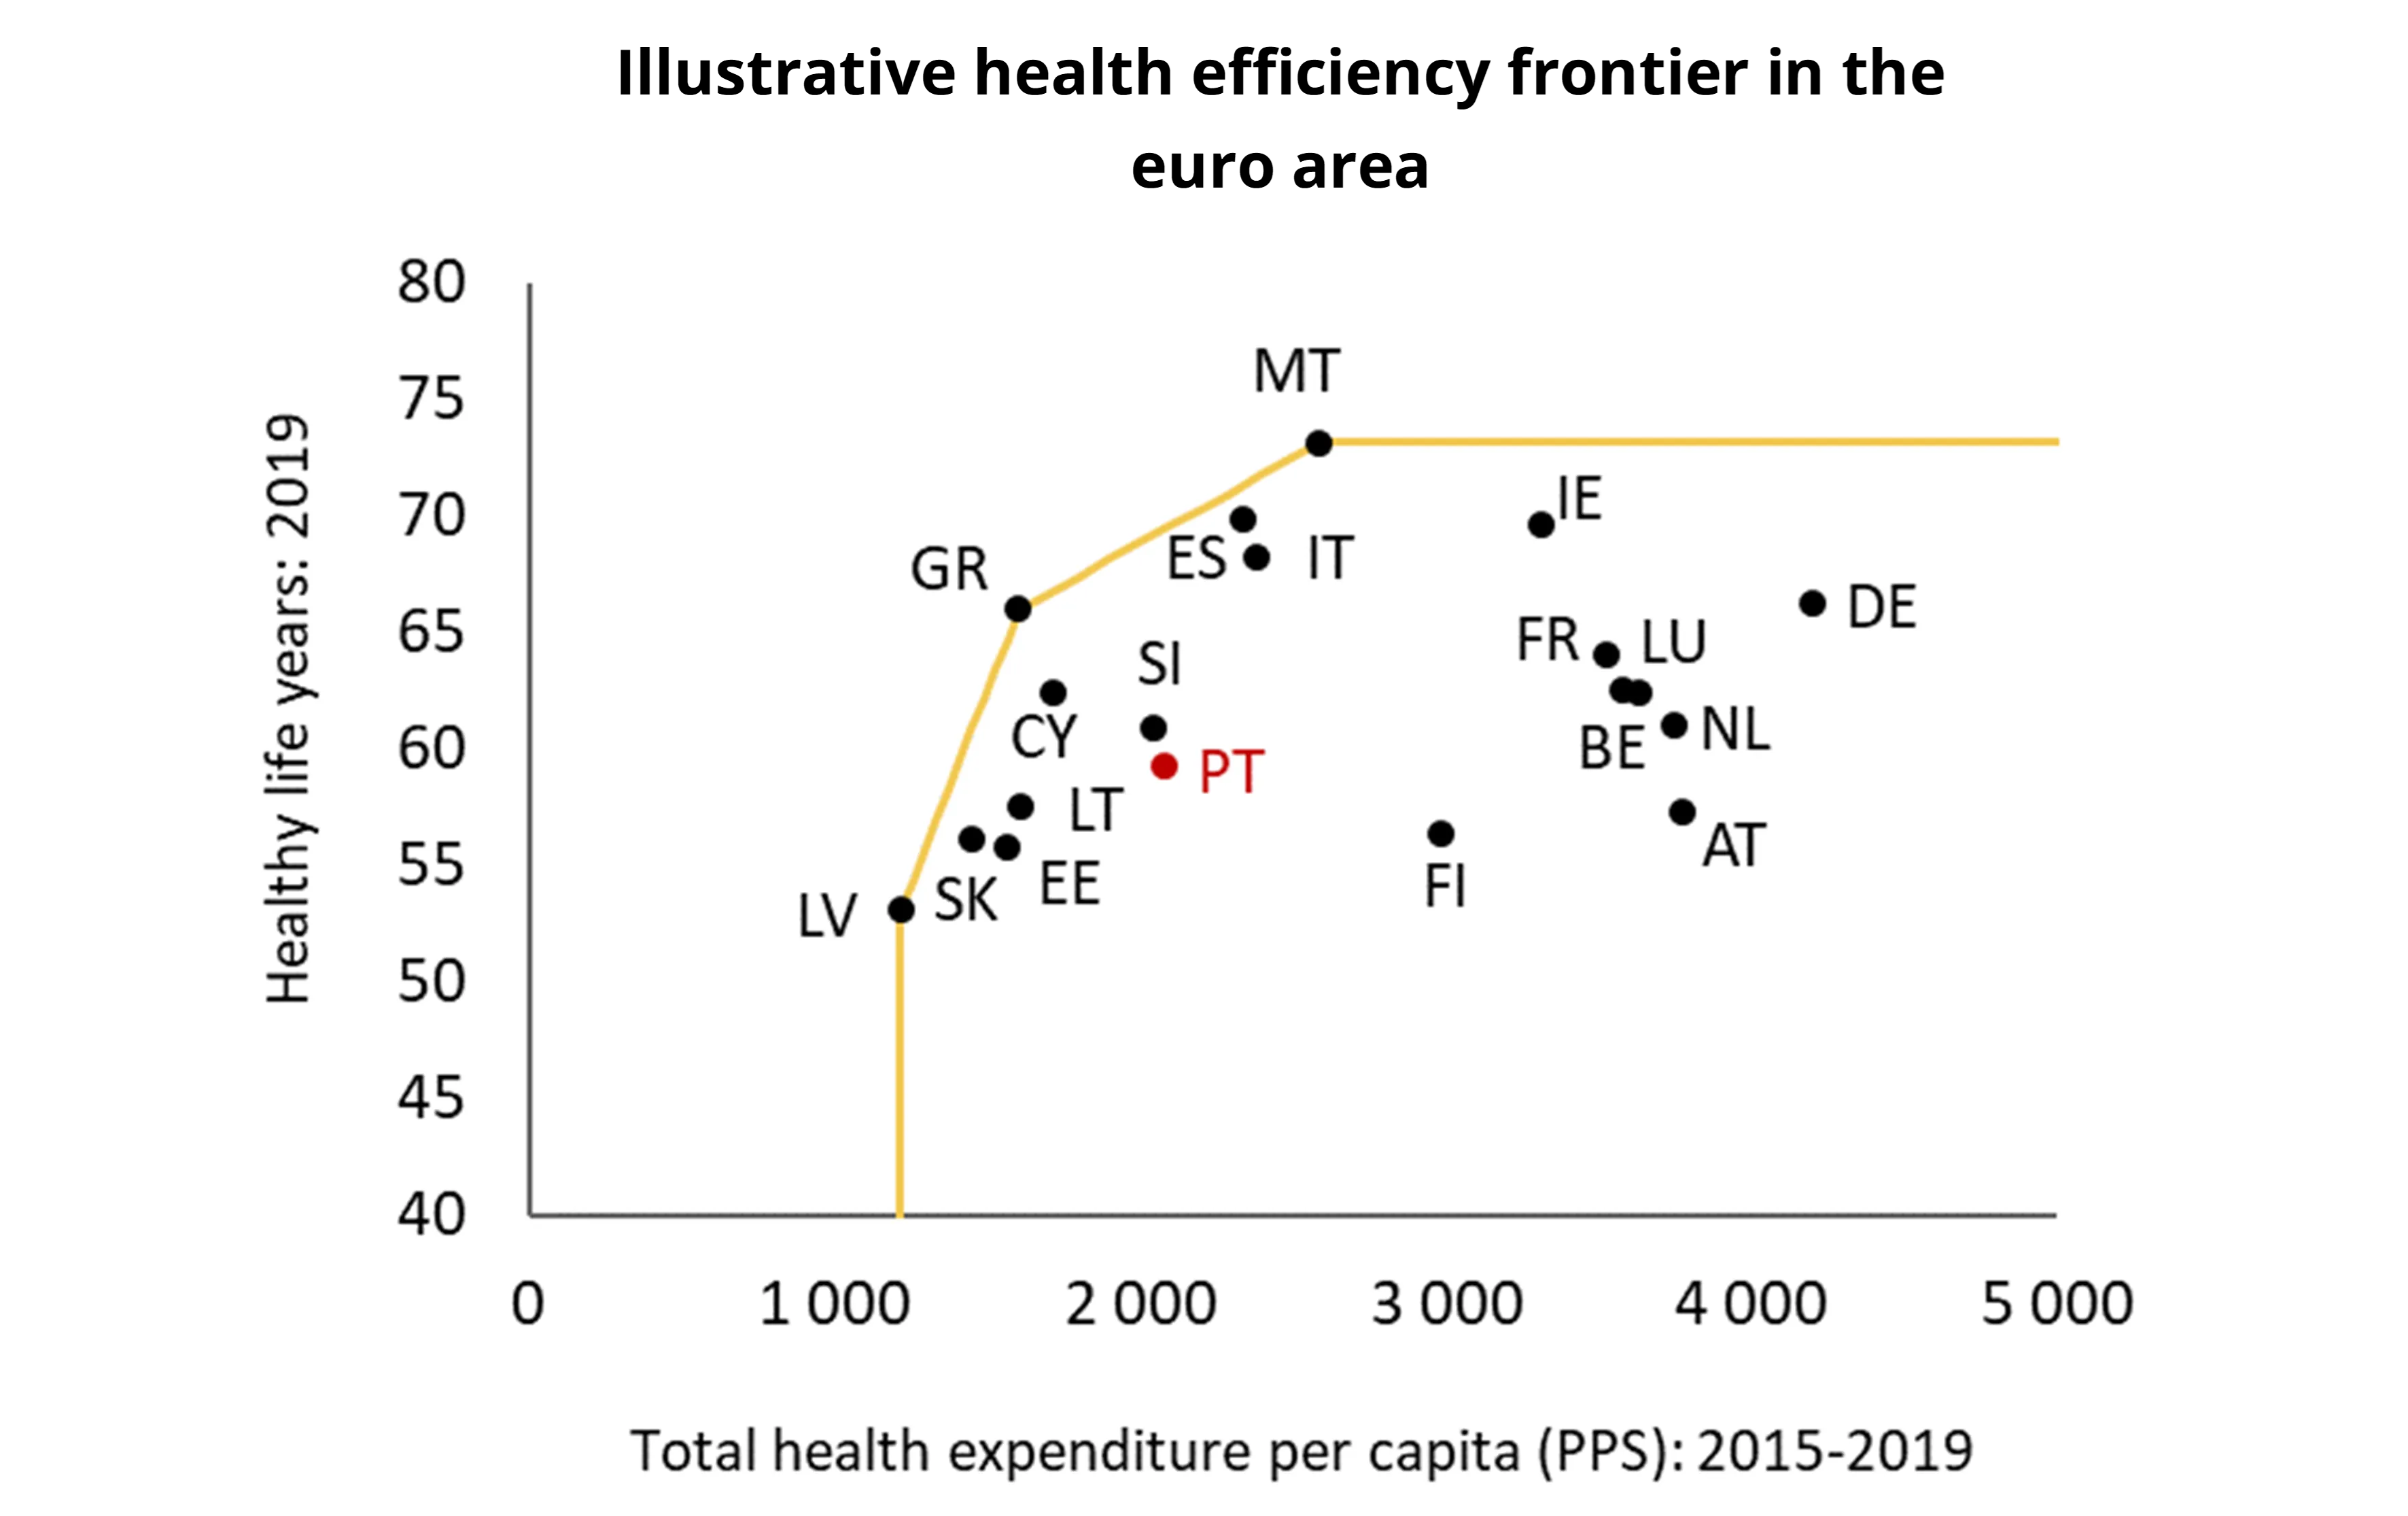 The efficiency of the health system in Portugal holds an intermediate position among euro area countries